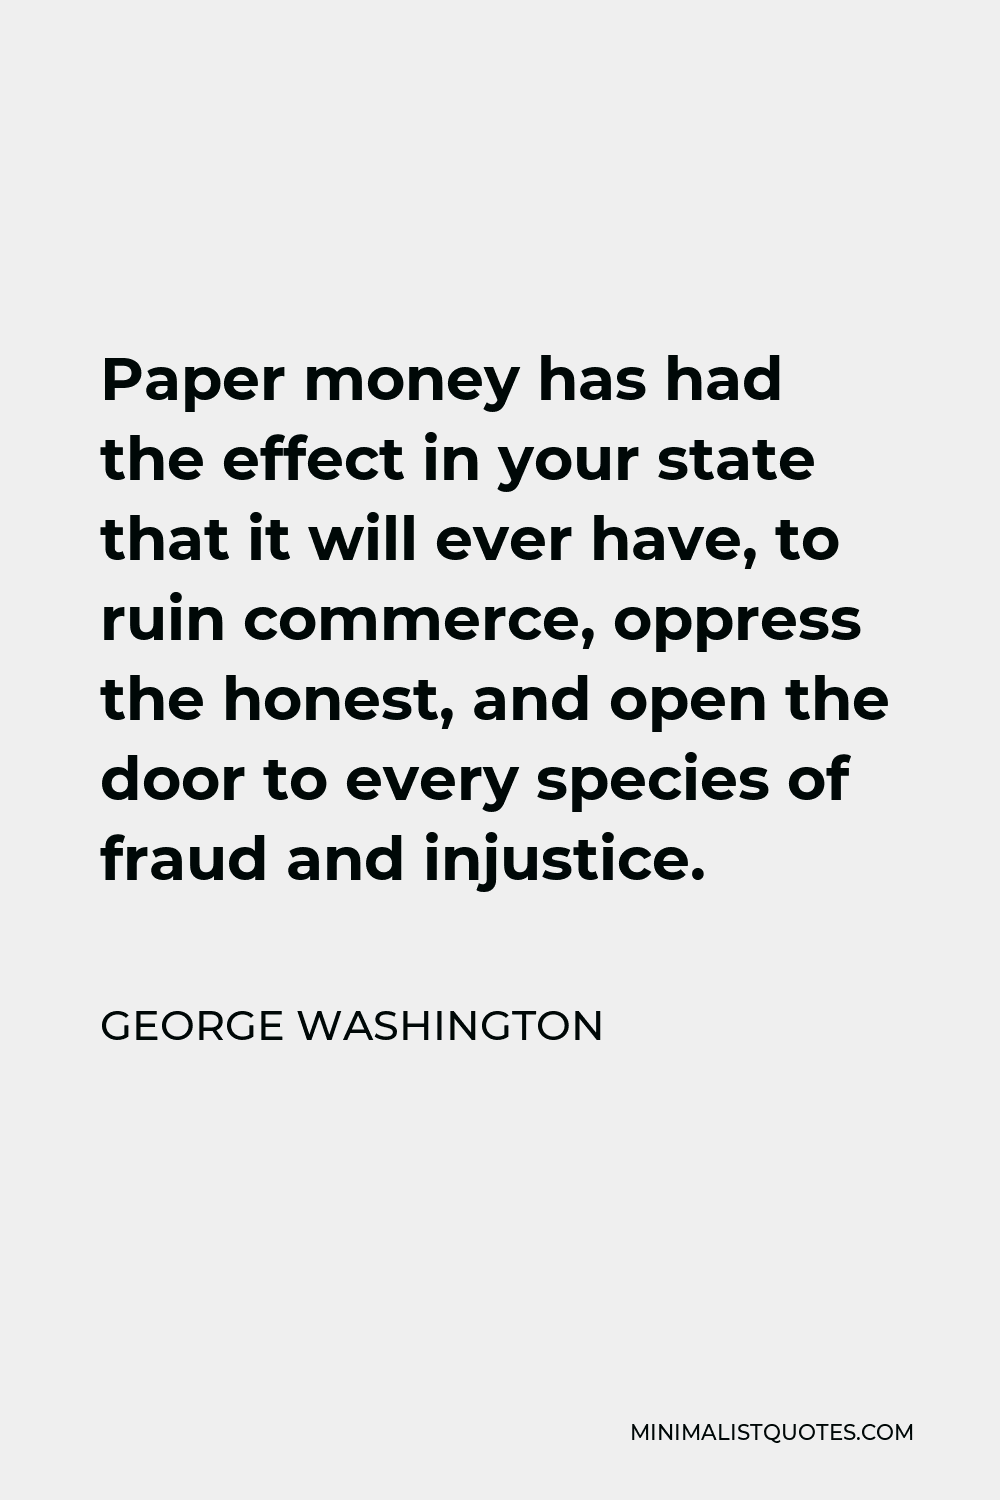 George Washington Quote - Paper money has had the effect in your state that it will ever have, to ruin commerce, oppress the honest, and open the door to every species of fraud and injustice.